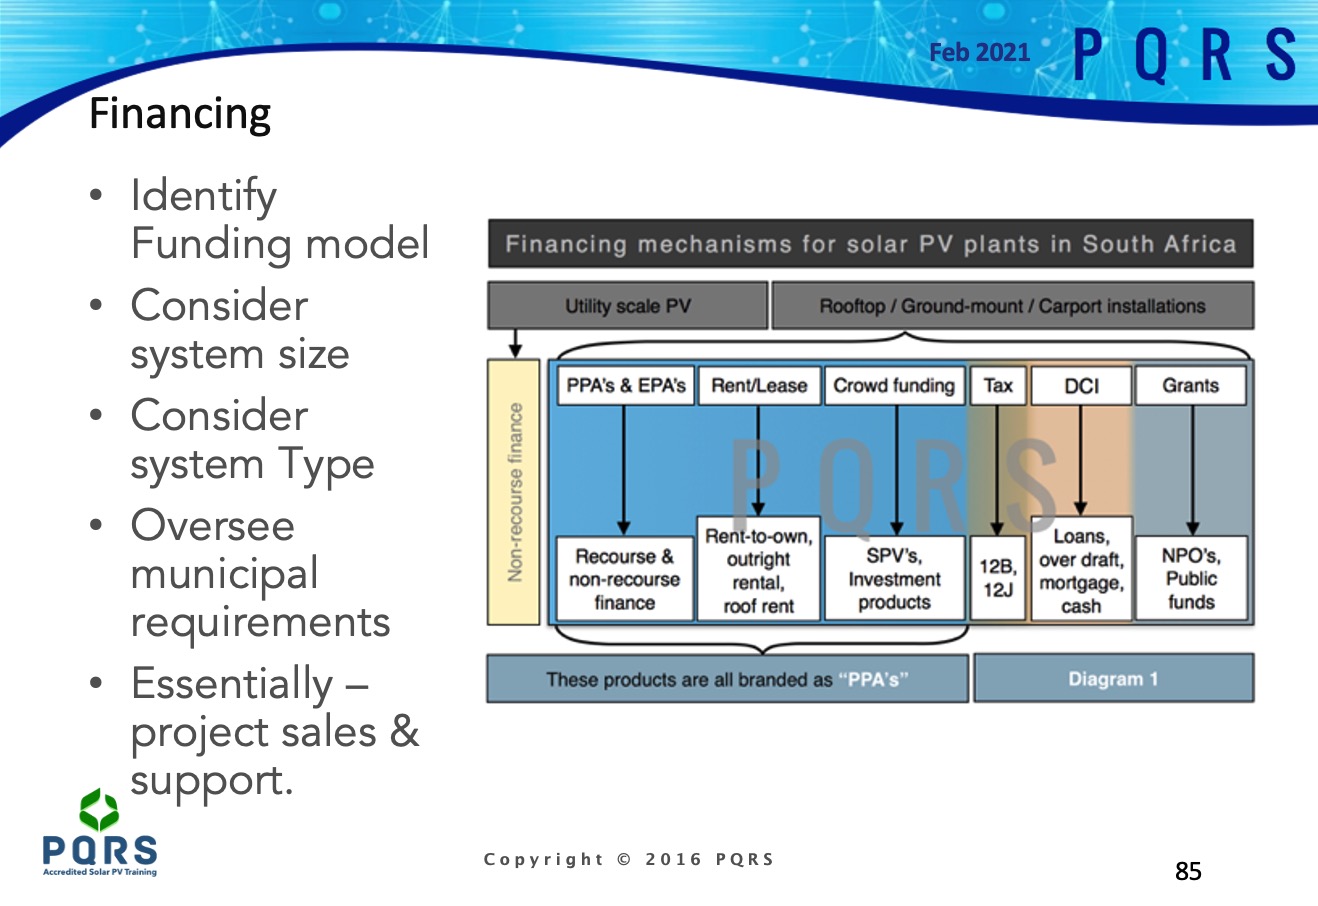 A Slide showing most of the financing models applied with solar PV systems in South Africa